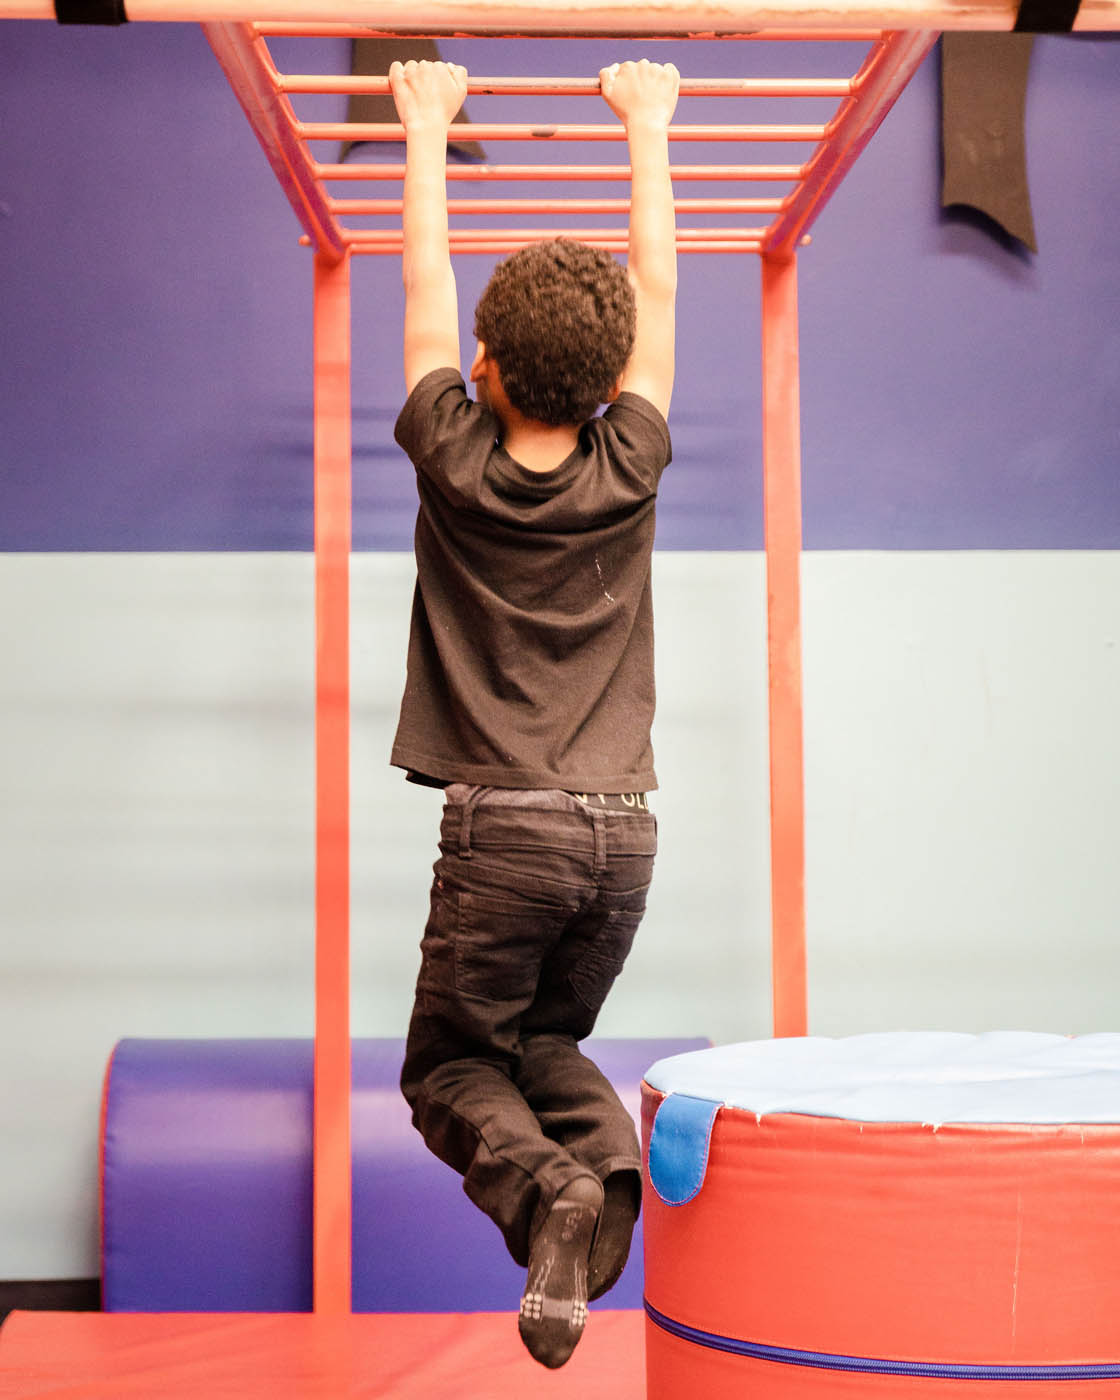 A boy playing in our kids safe gym at Romp n' Roll Wethersfield.